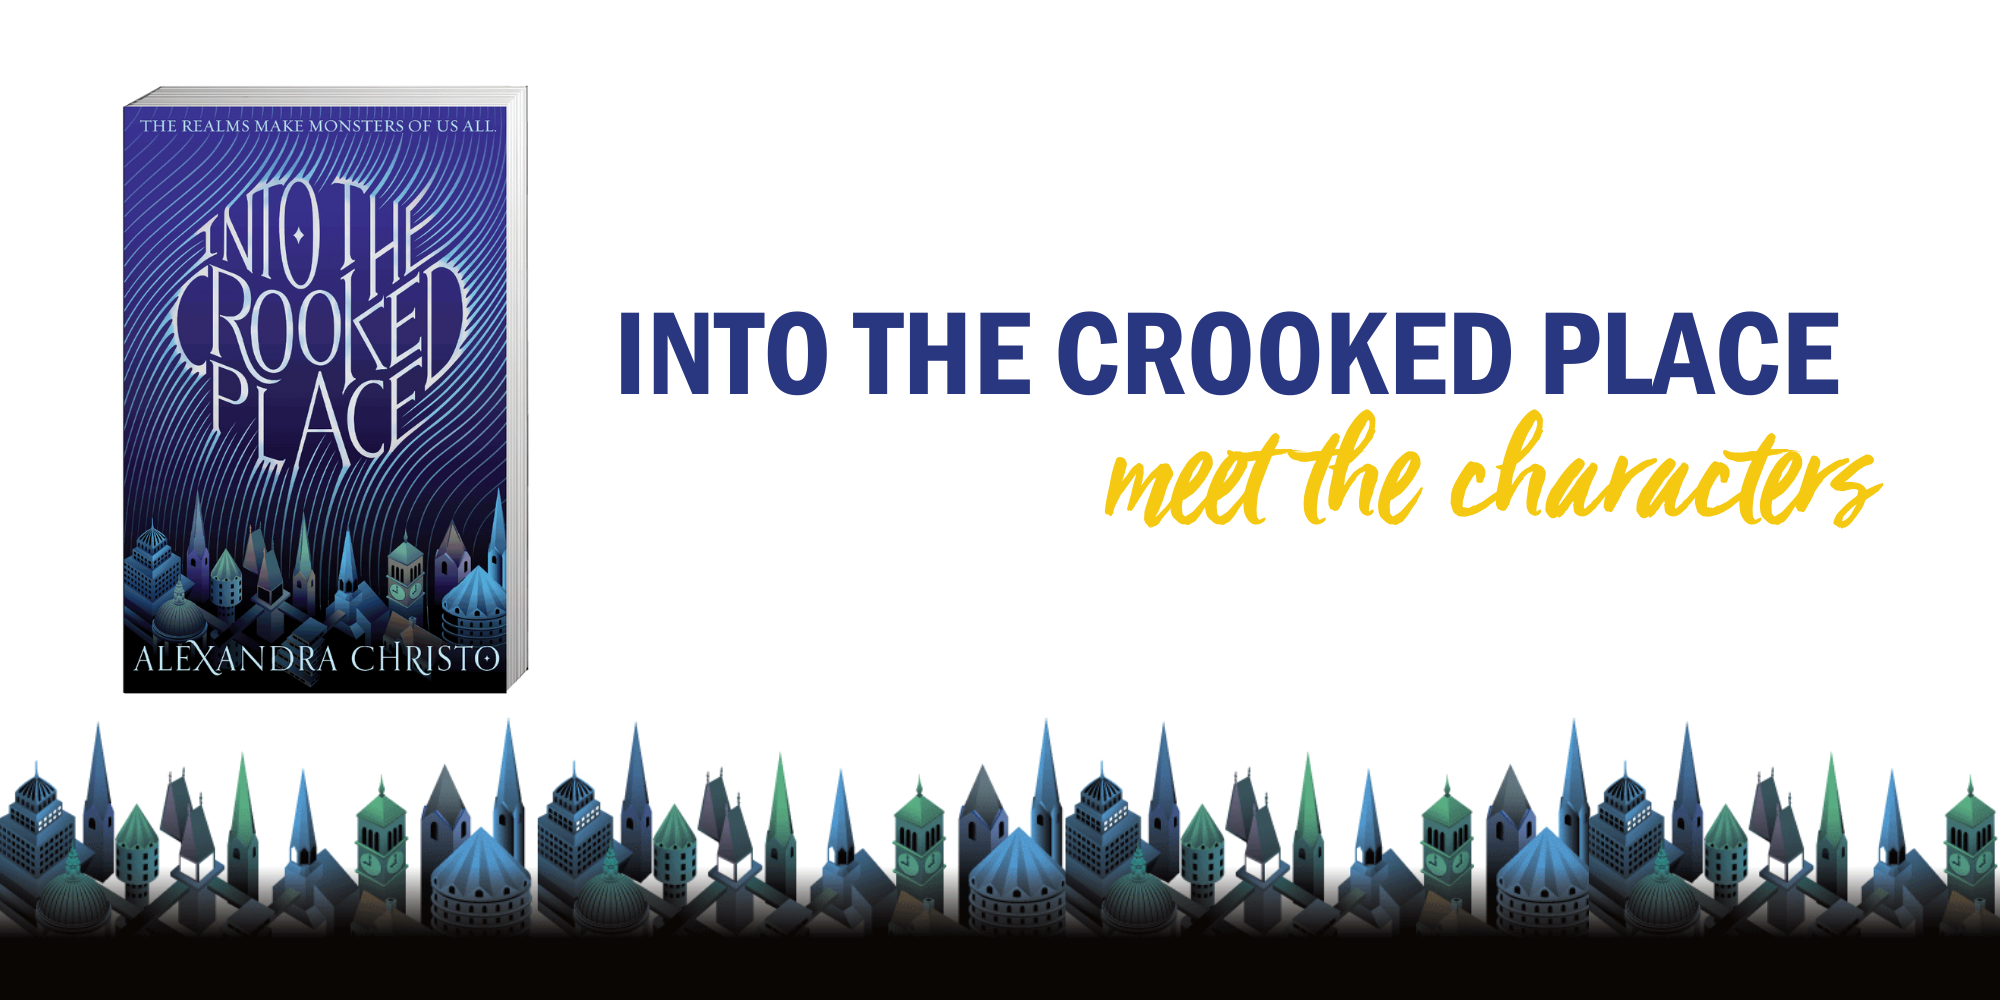 Meet the Characters of Into the Crooked Place